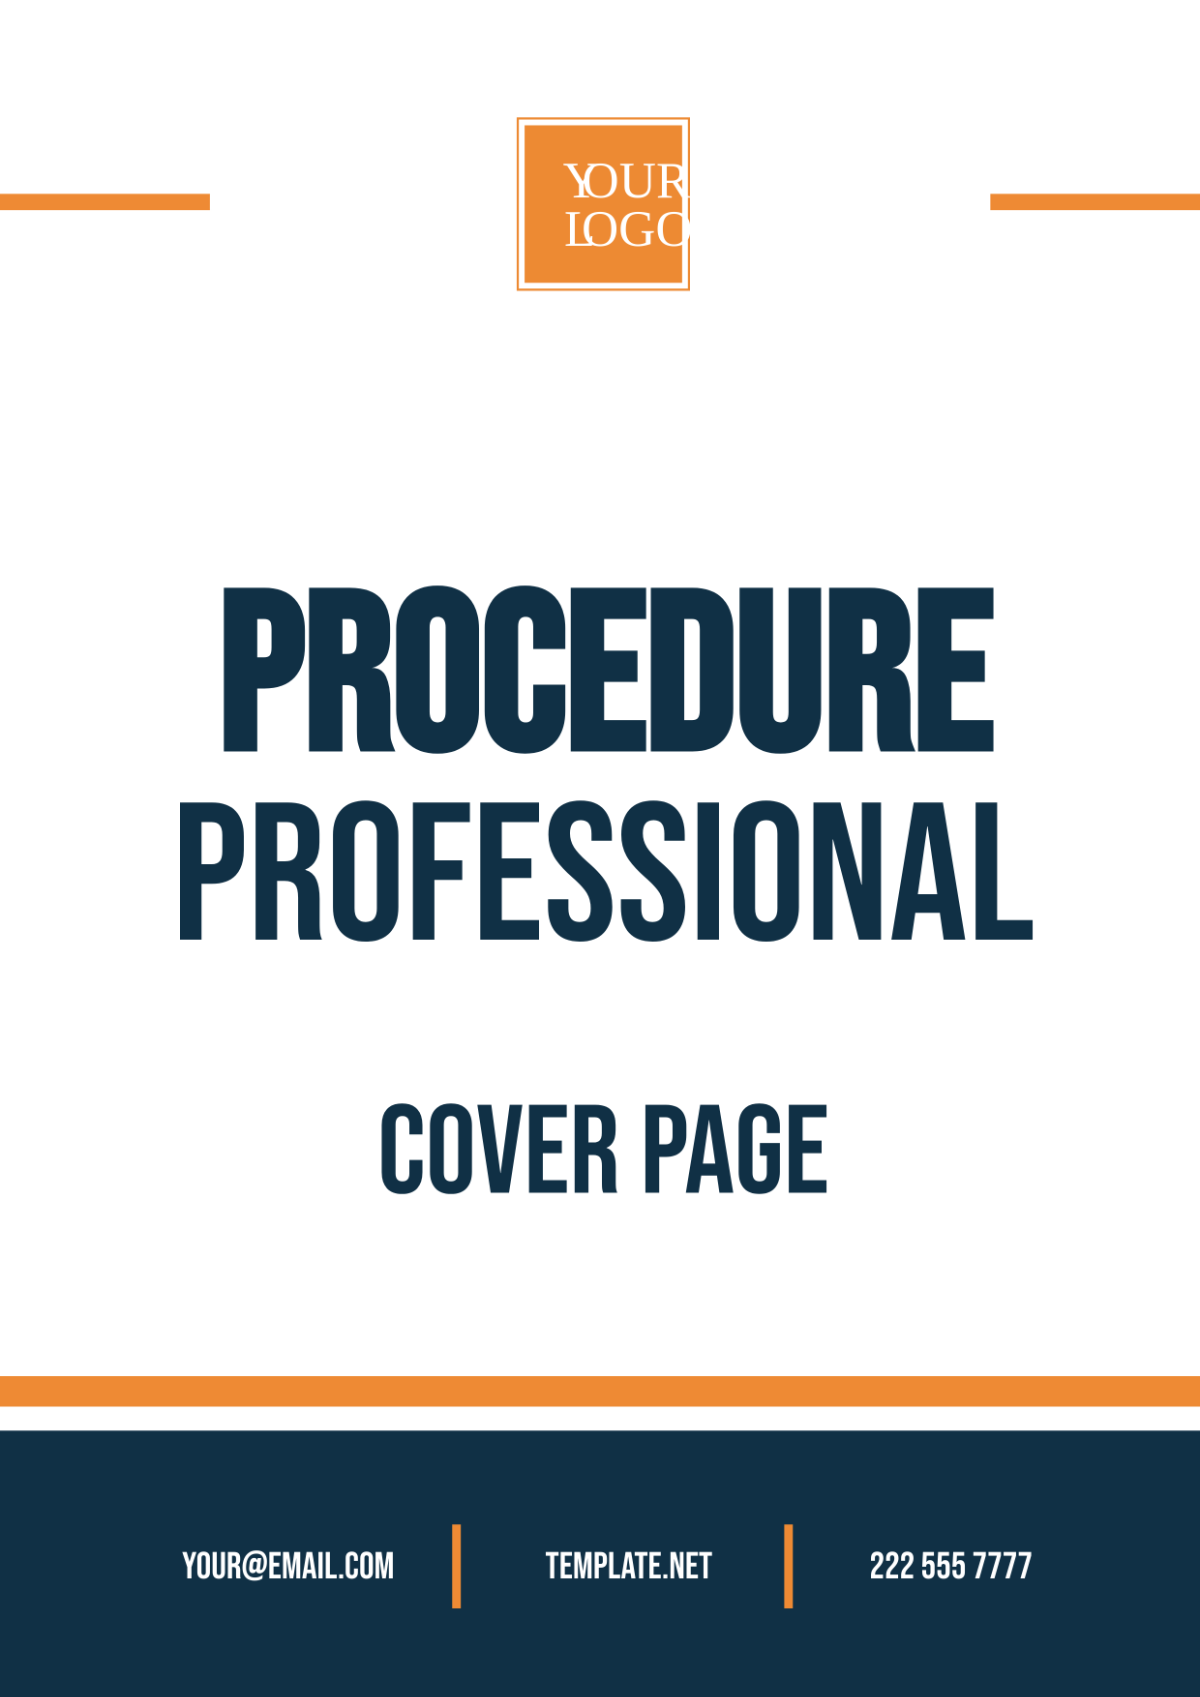 Procedure Professional Cover Page Template